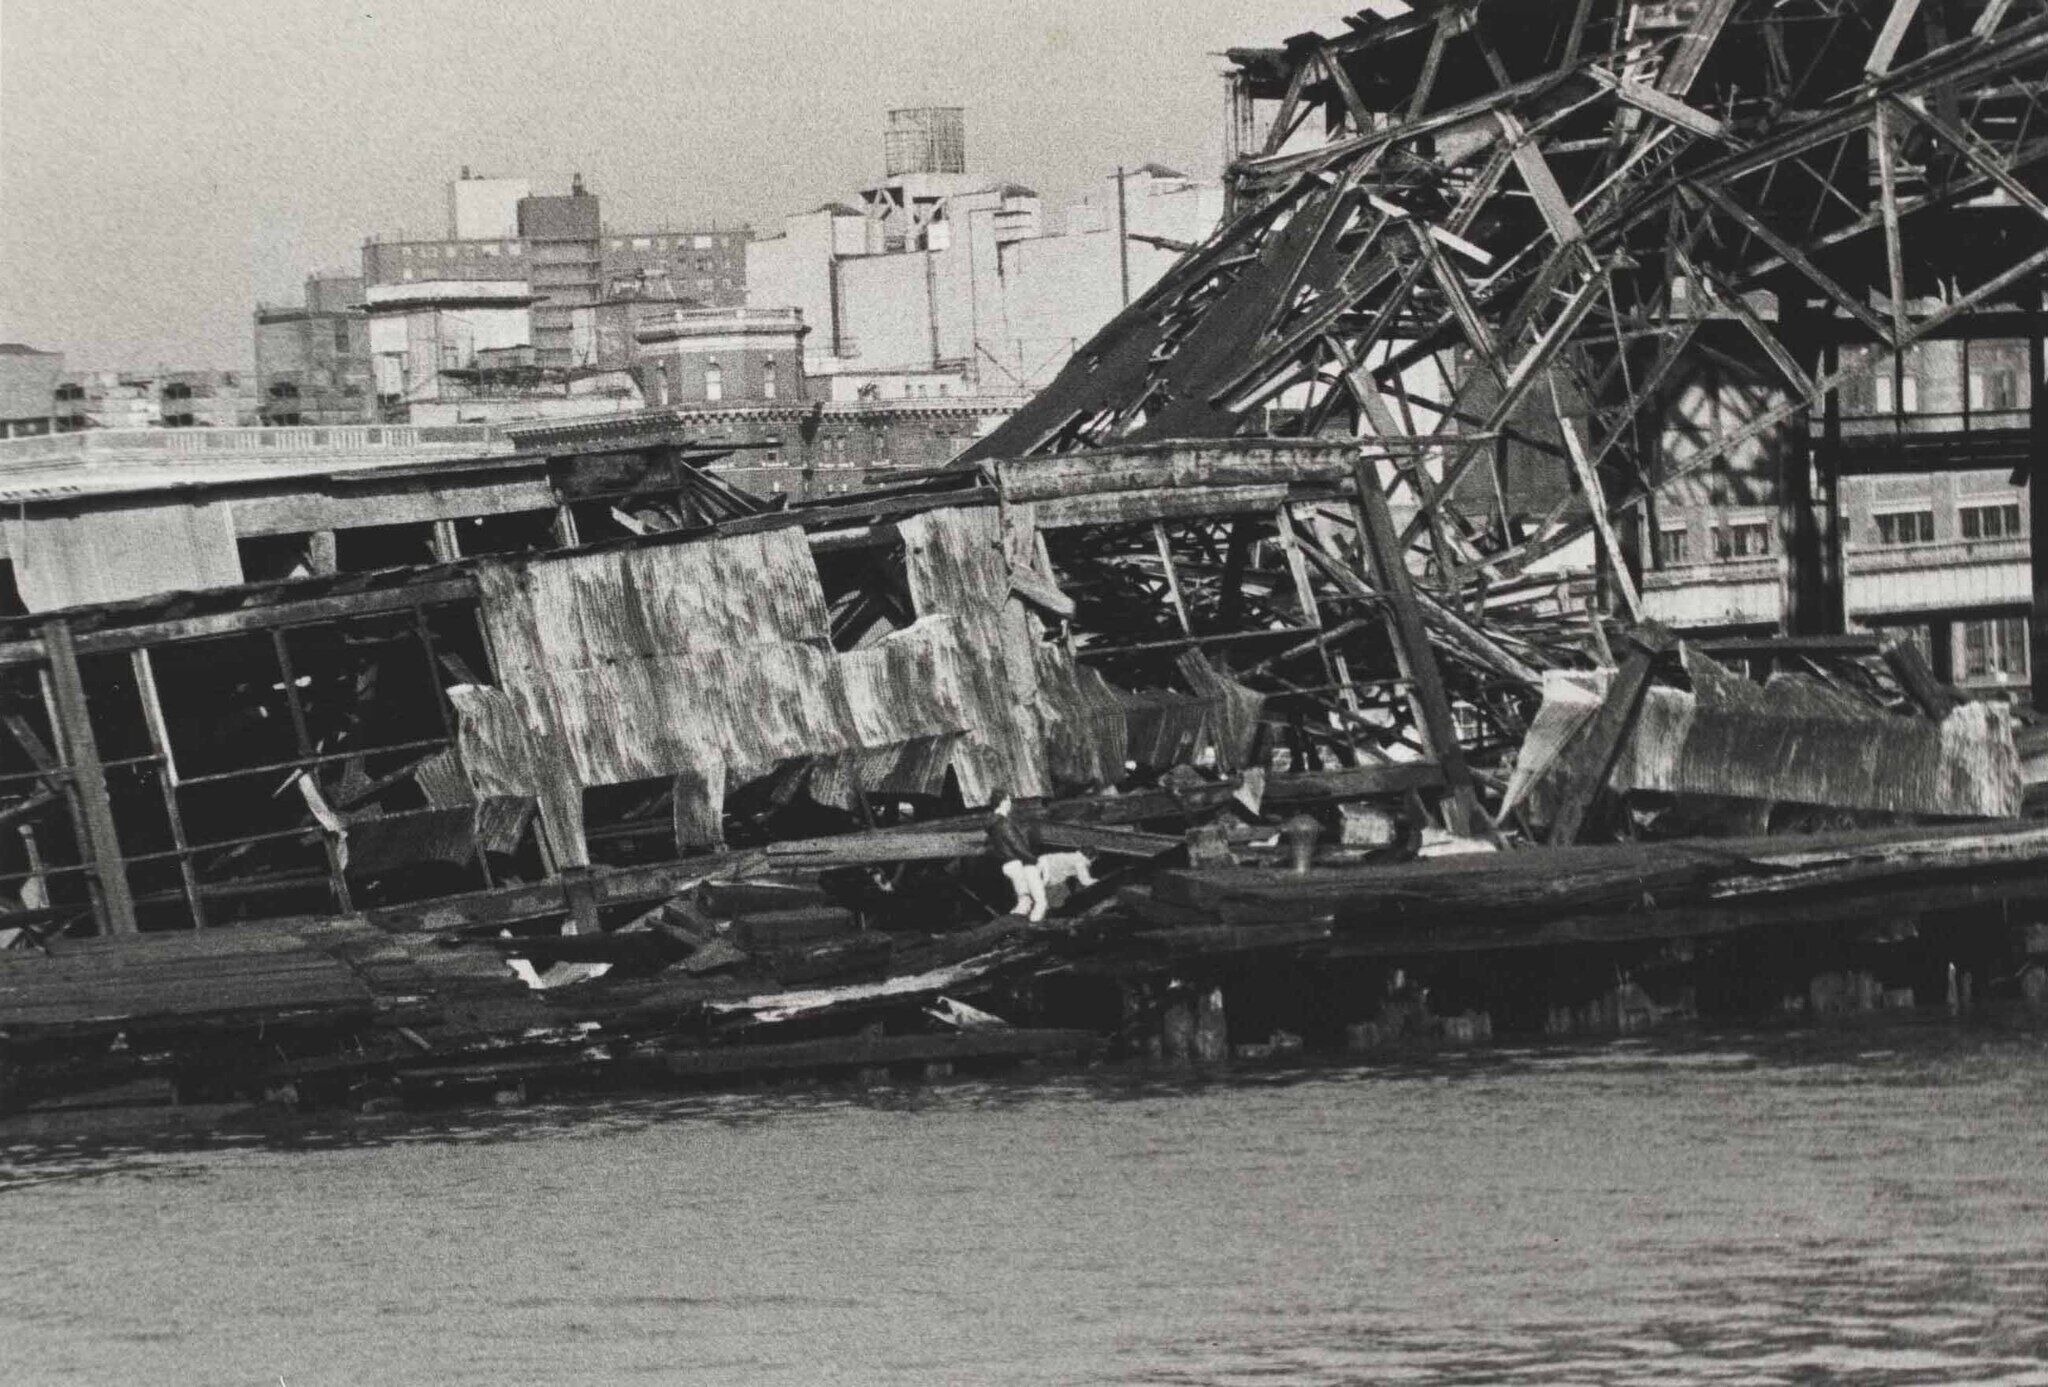 A black and white photograph of a collapsed building on the pier, two men are fornicating in the middle.